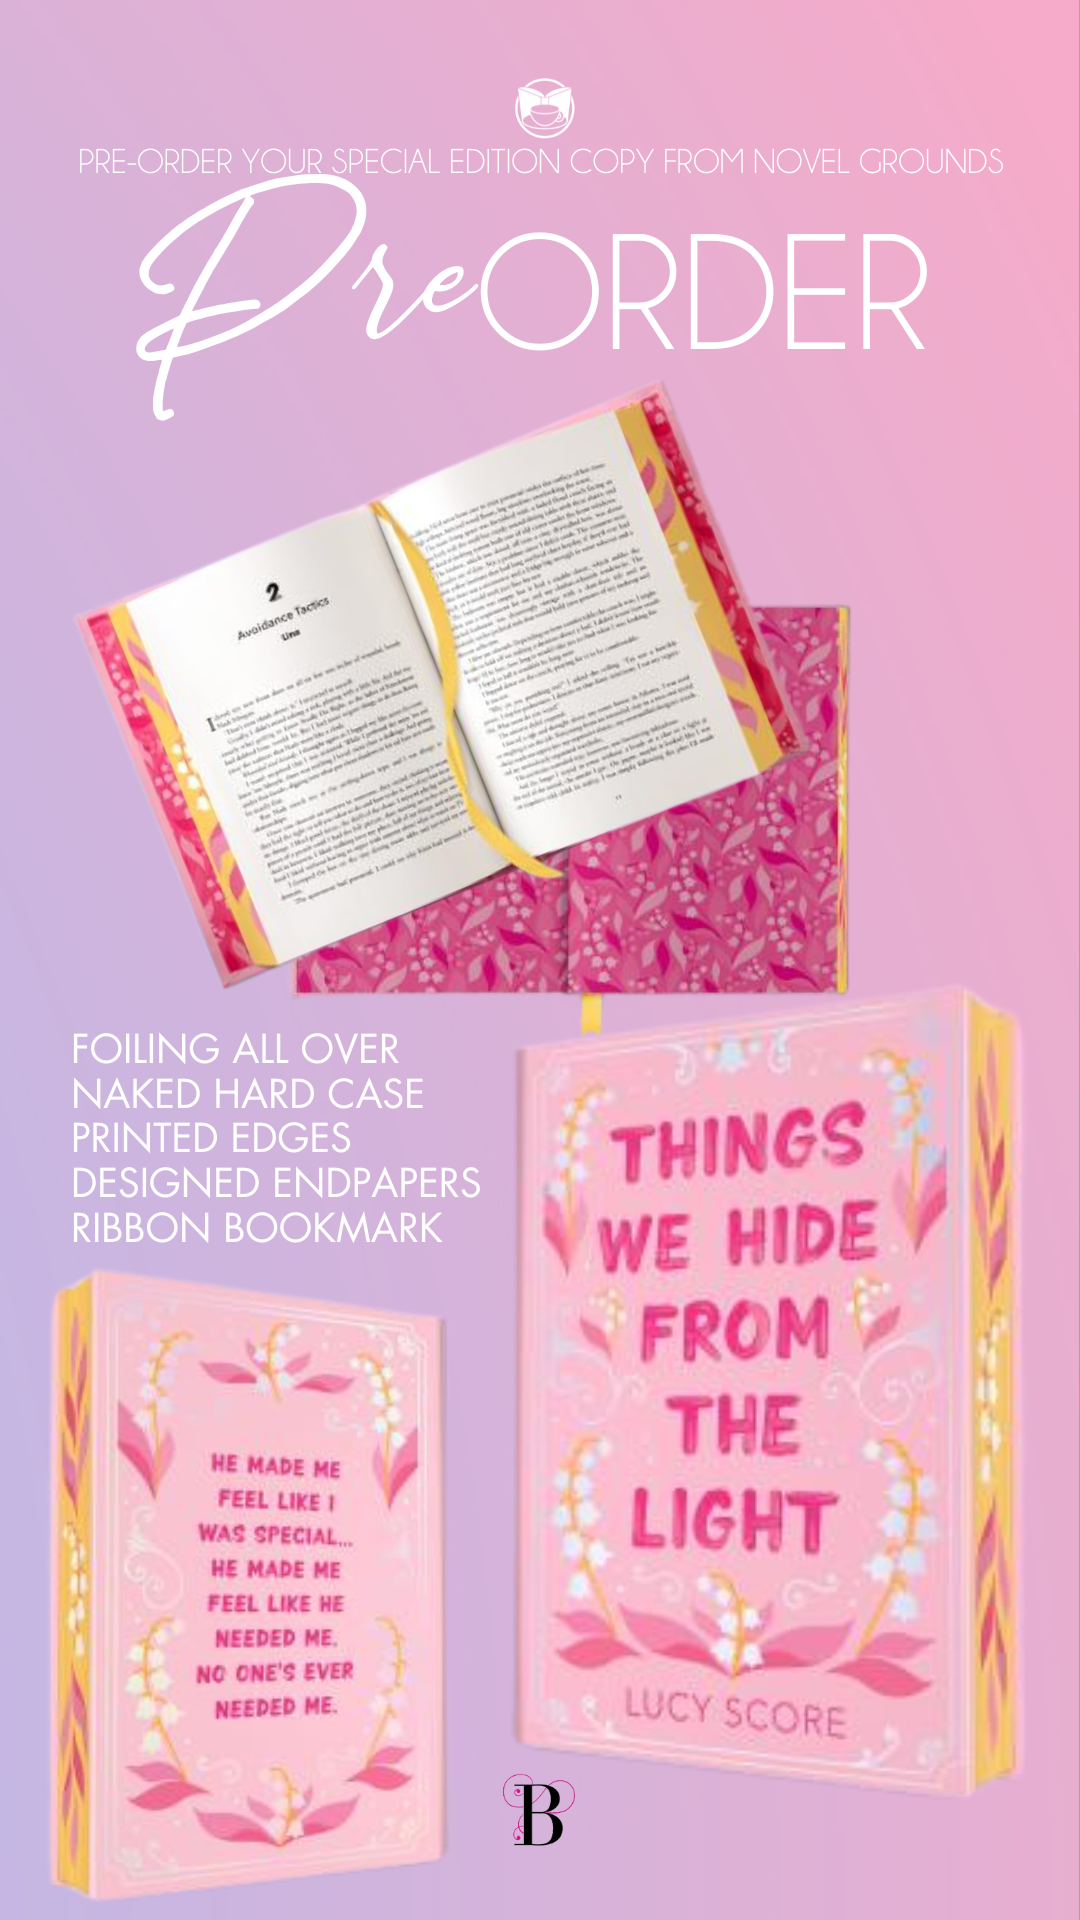 Pre-Order: Things We Hide From The Light (Special Hardcover Special Edition) by Lucy Score